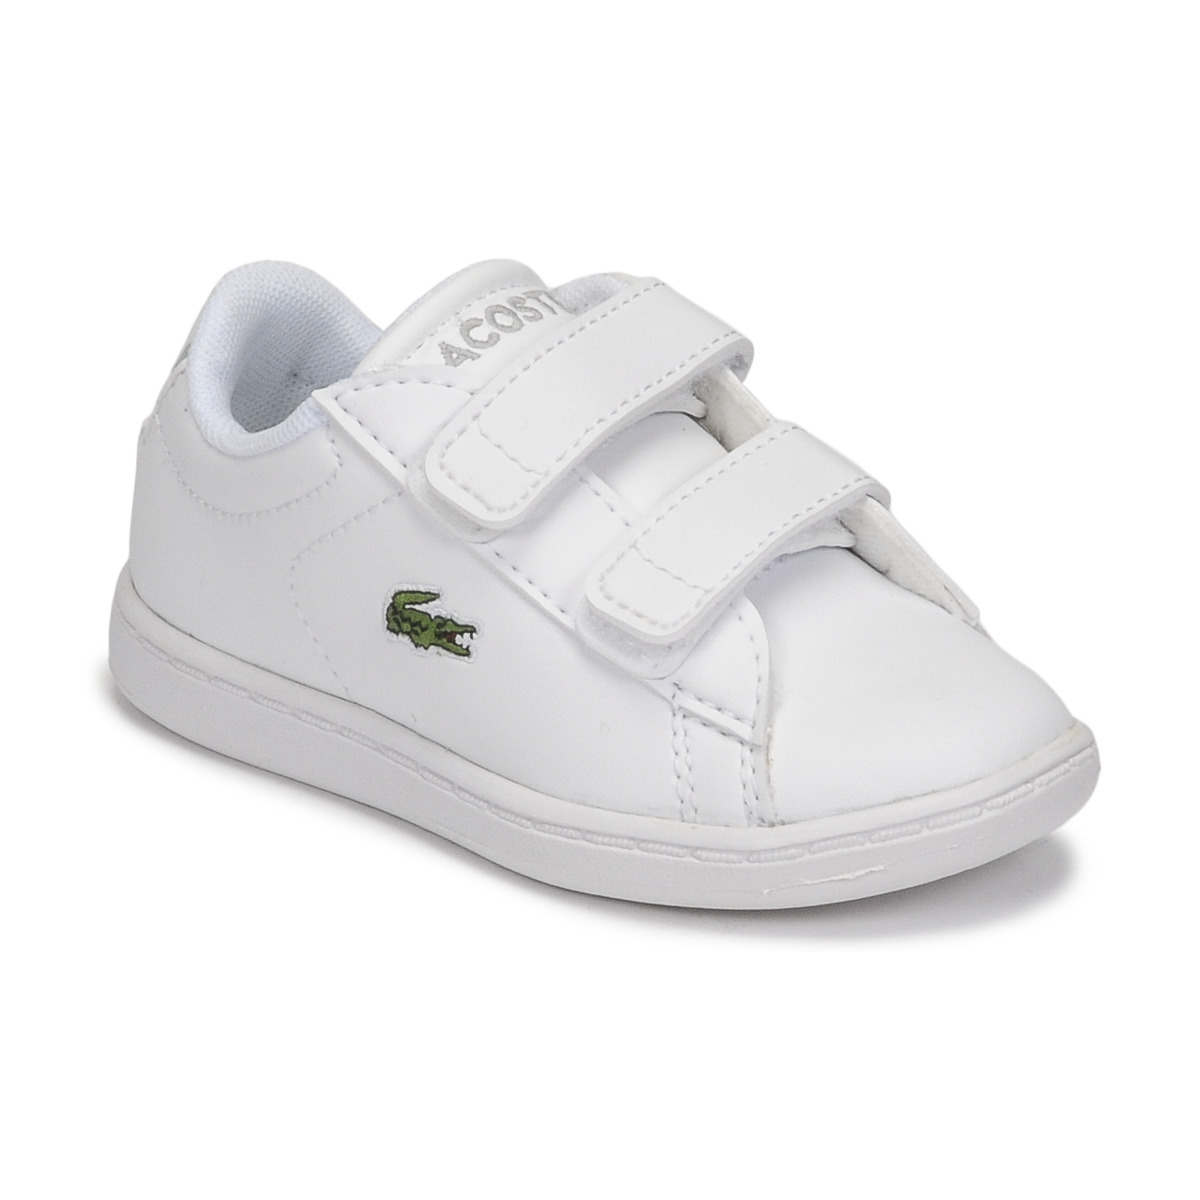 Lacoste Carnaby Evo Bl 21 1 Sui White